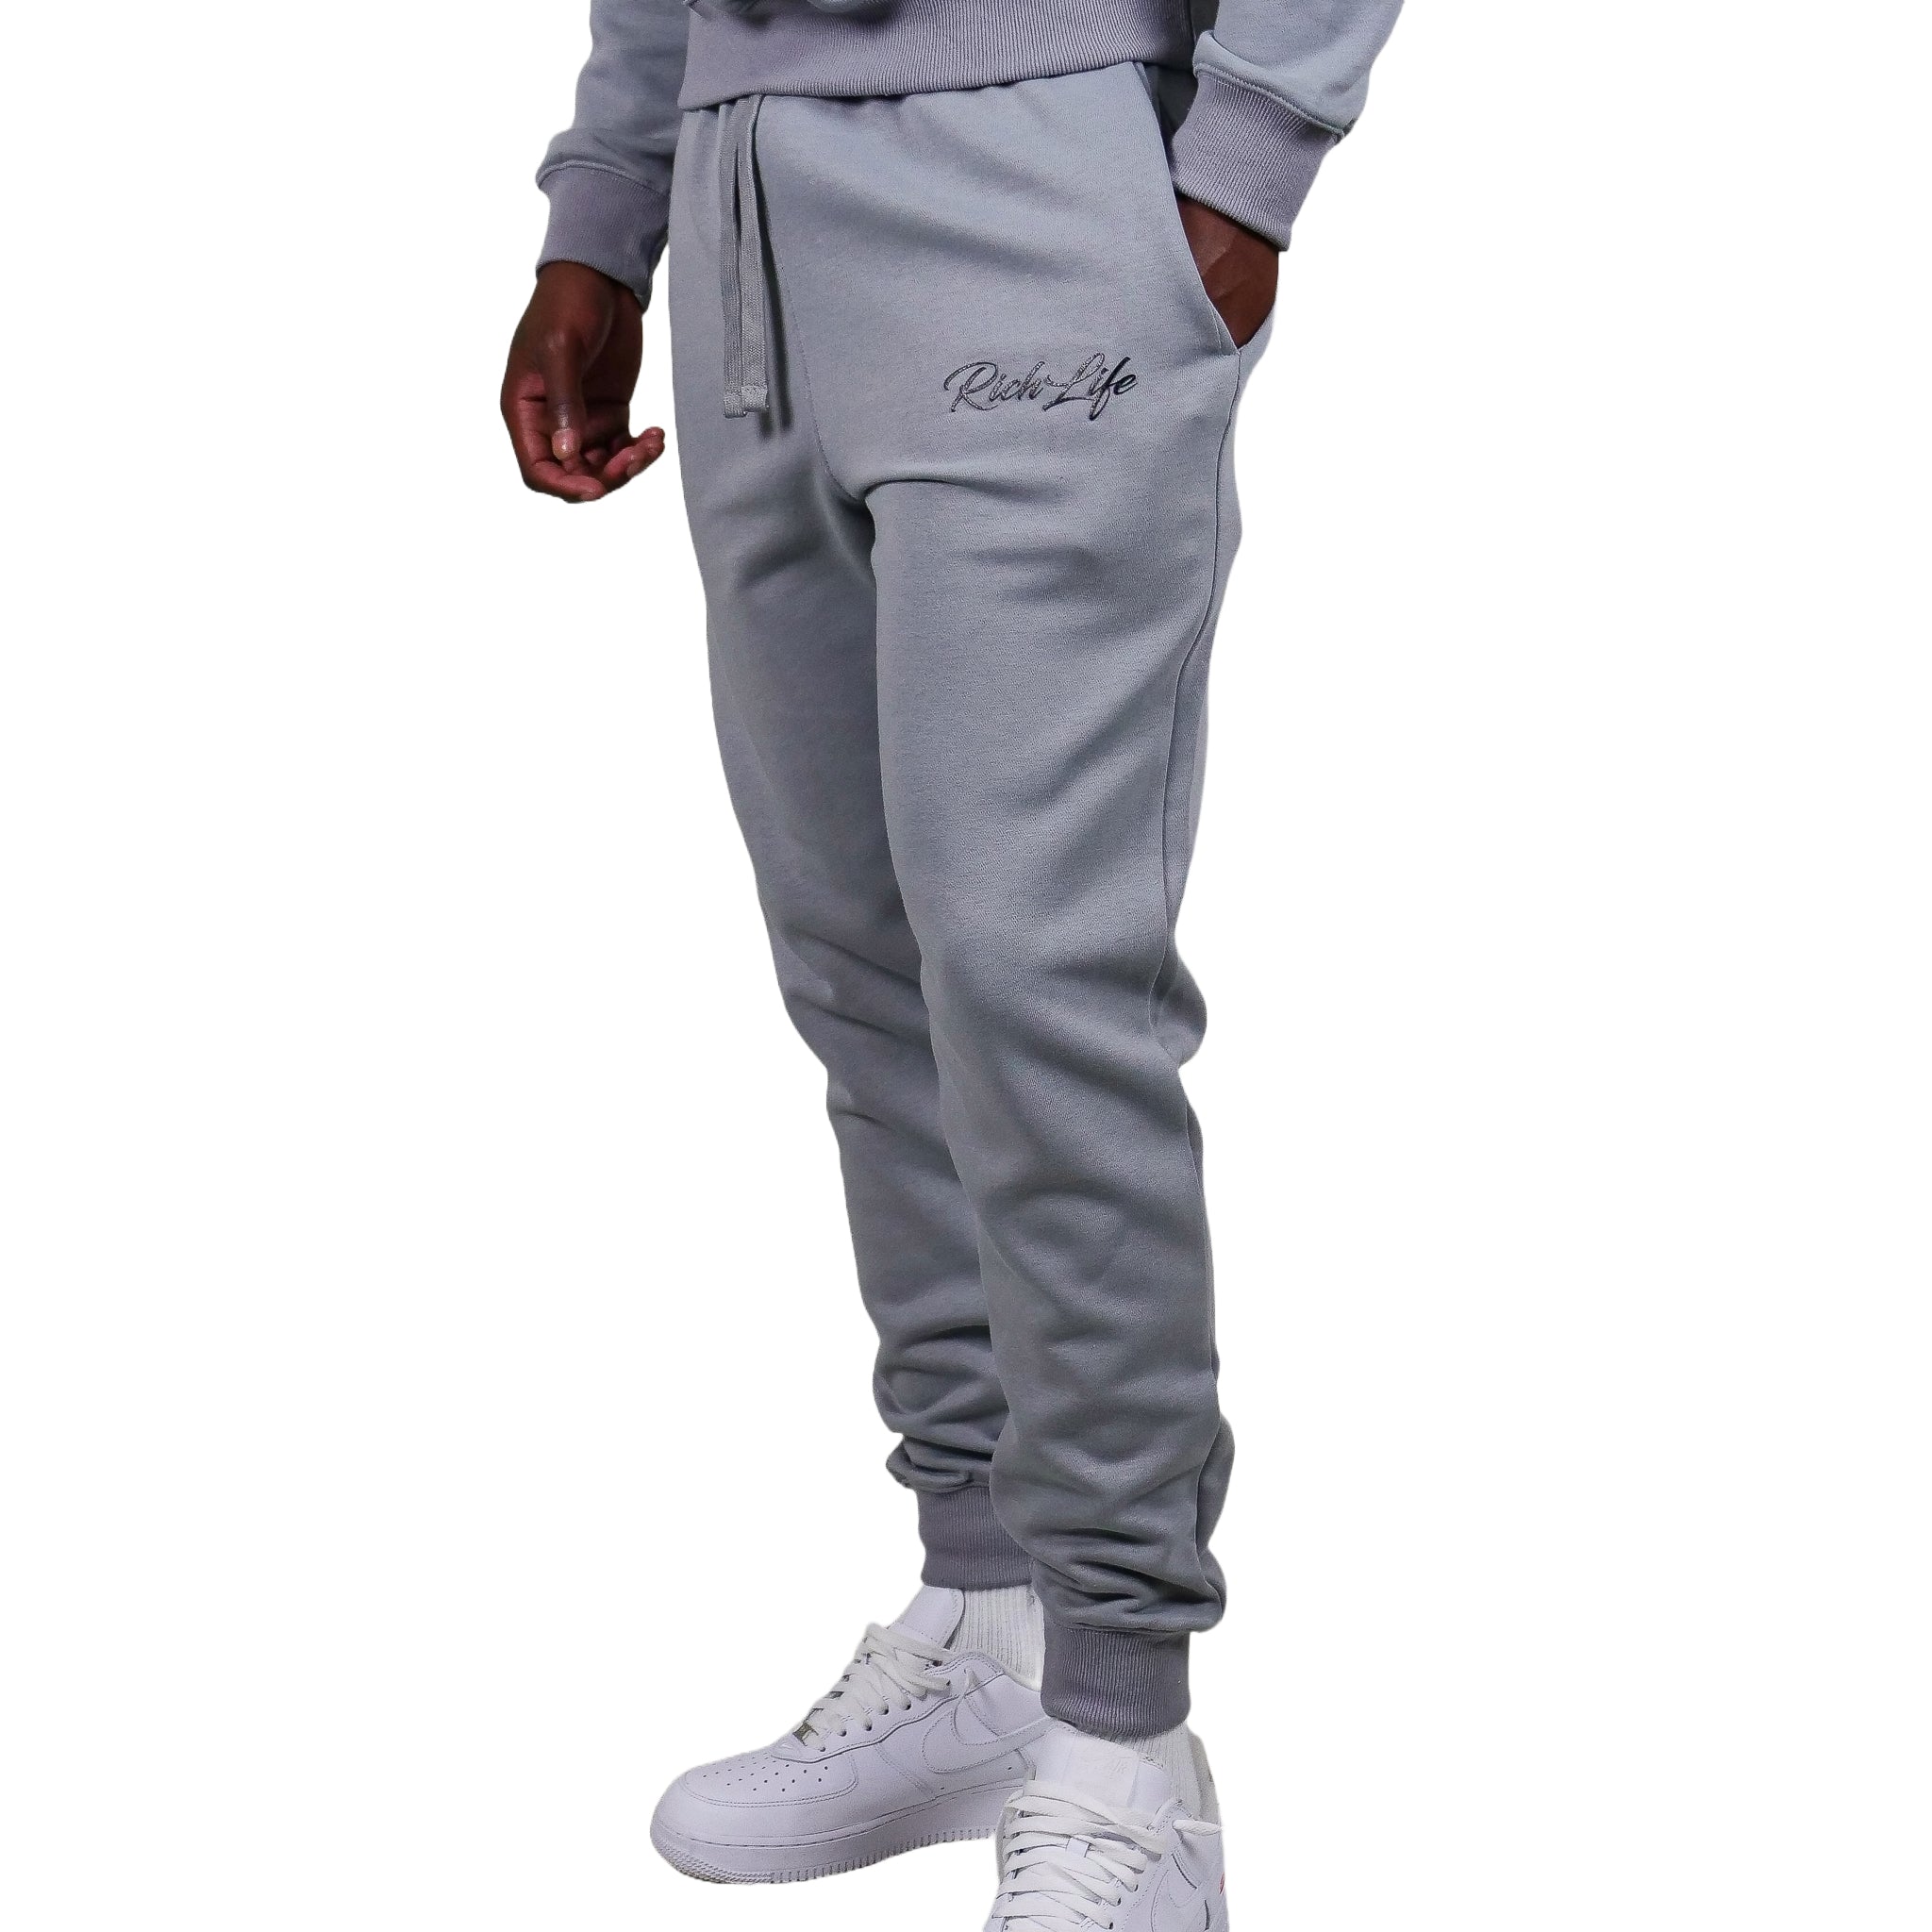 Rich Life "Luxe" Sweatsuits